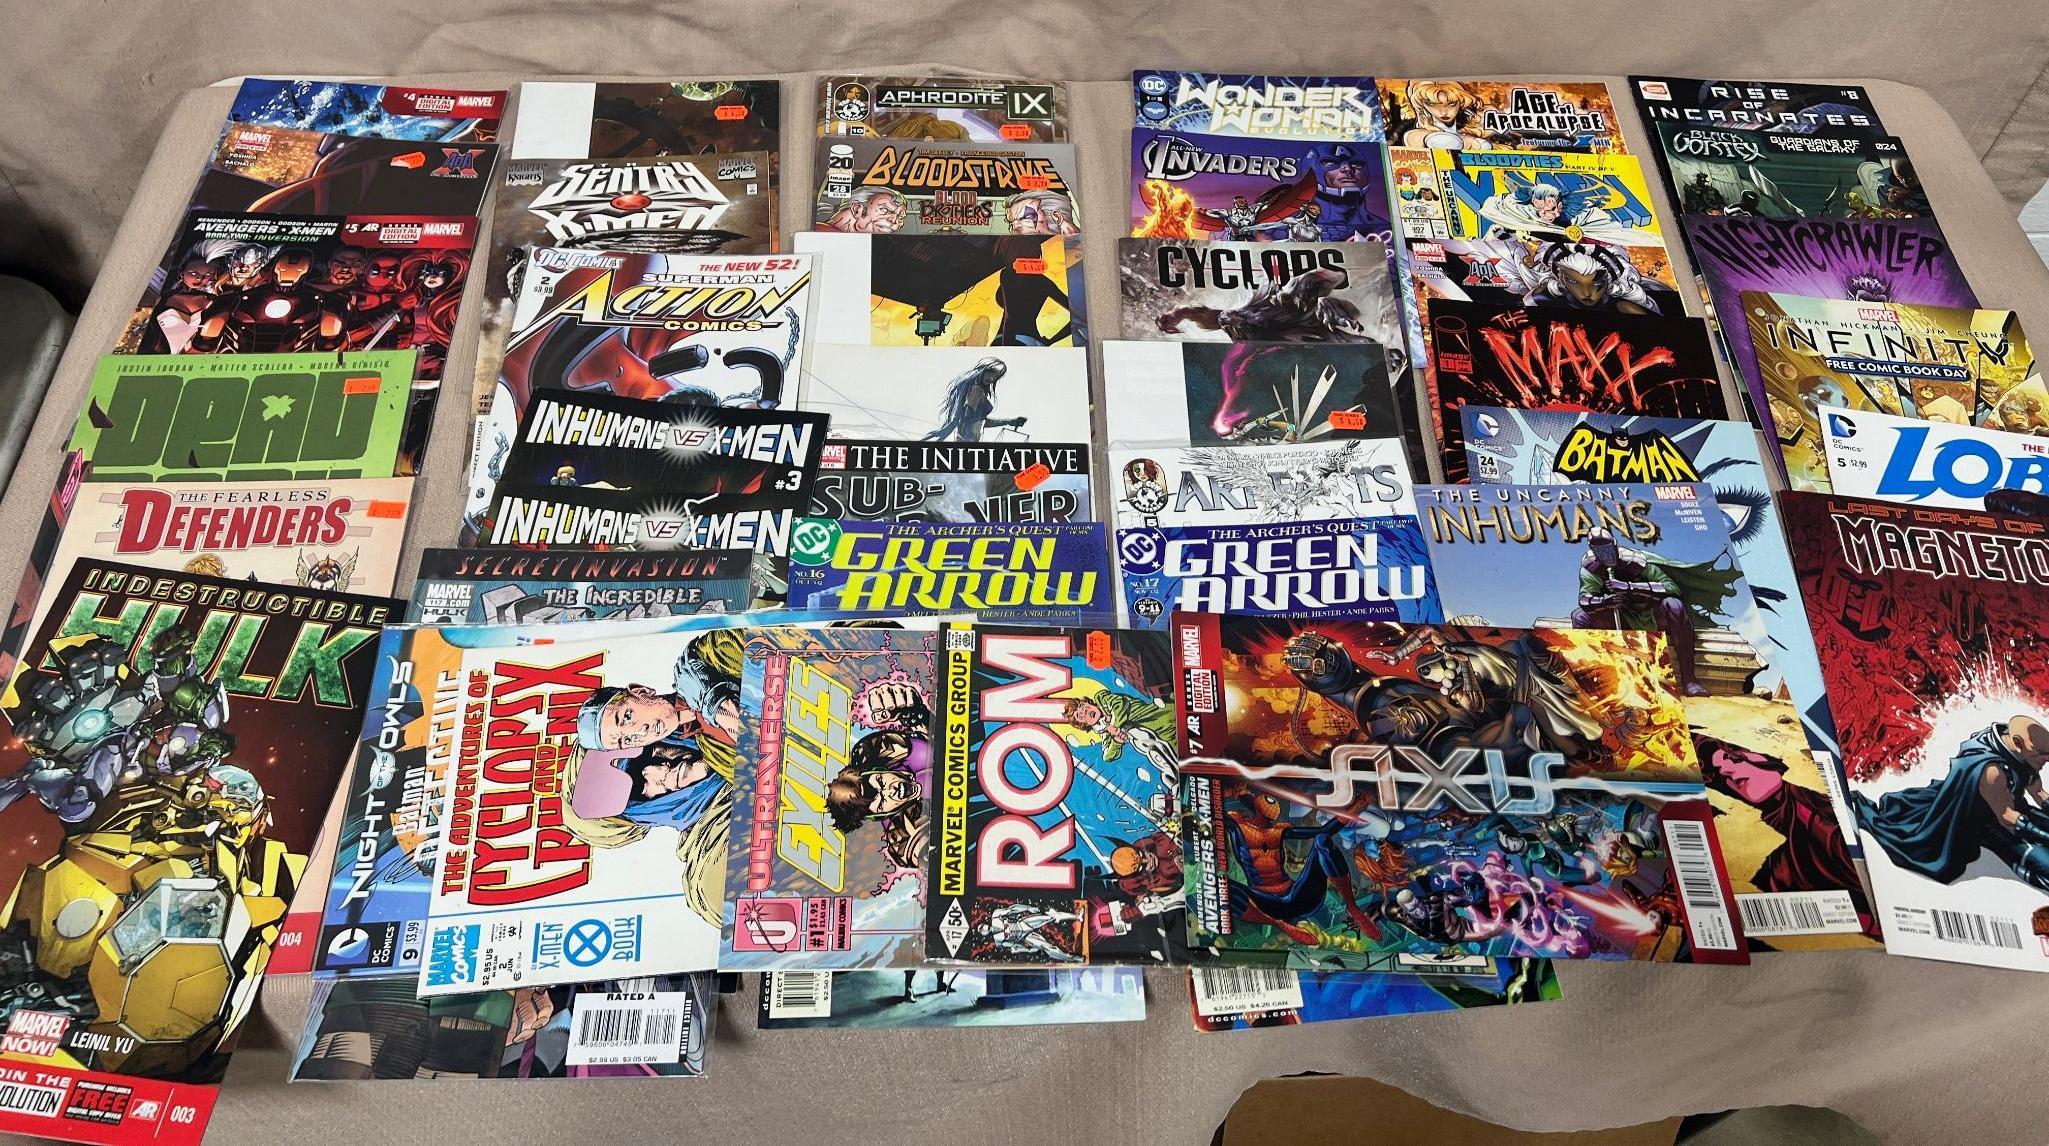 40+ Asst. Comic Books, see pics for comics included